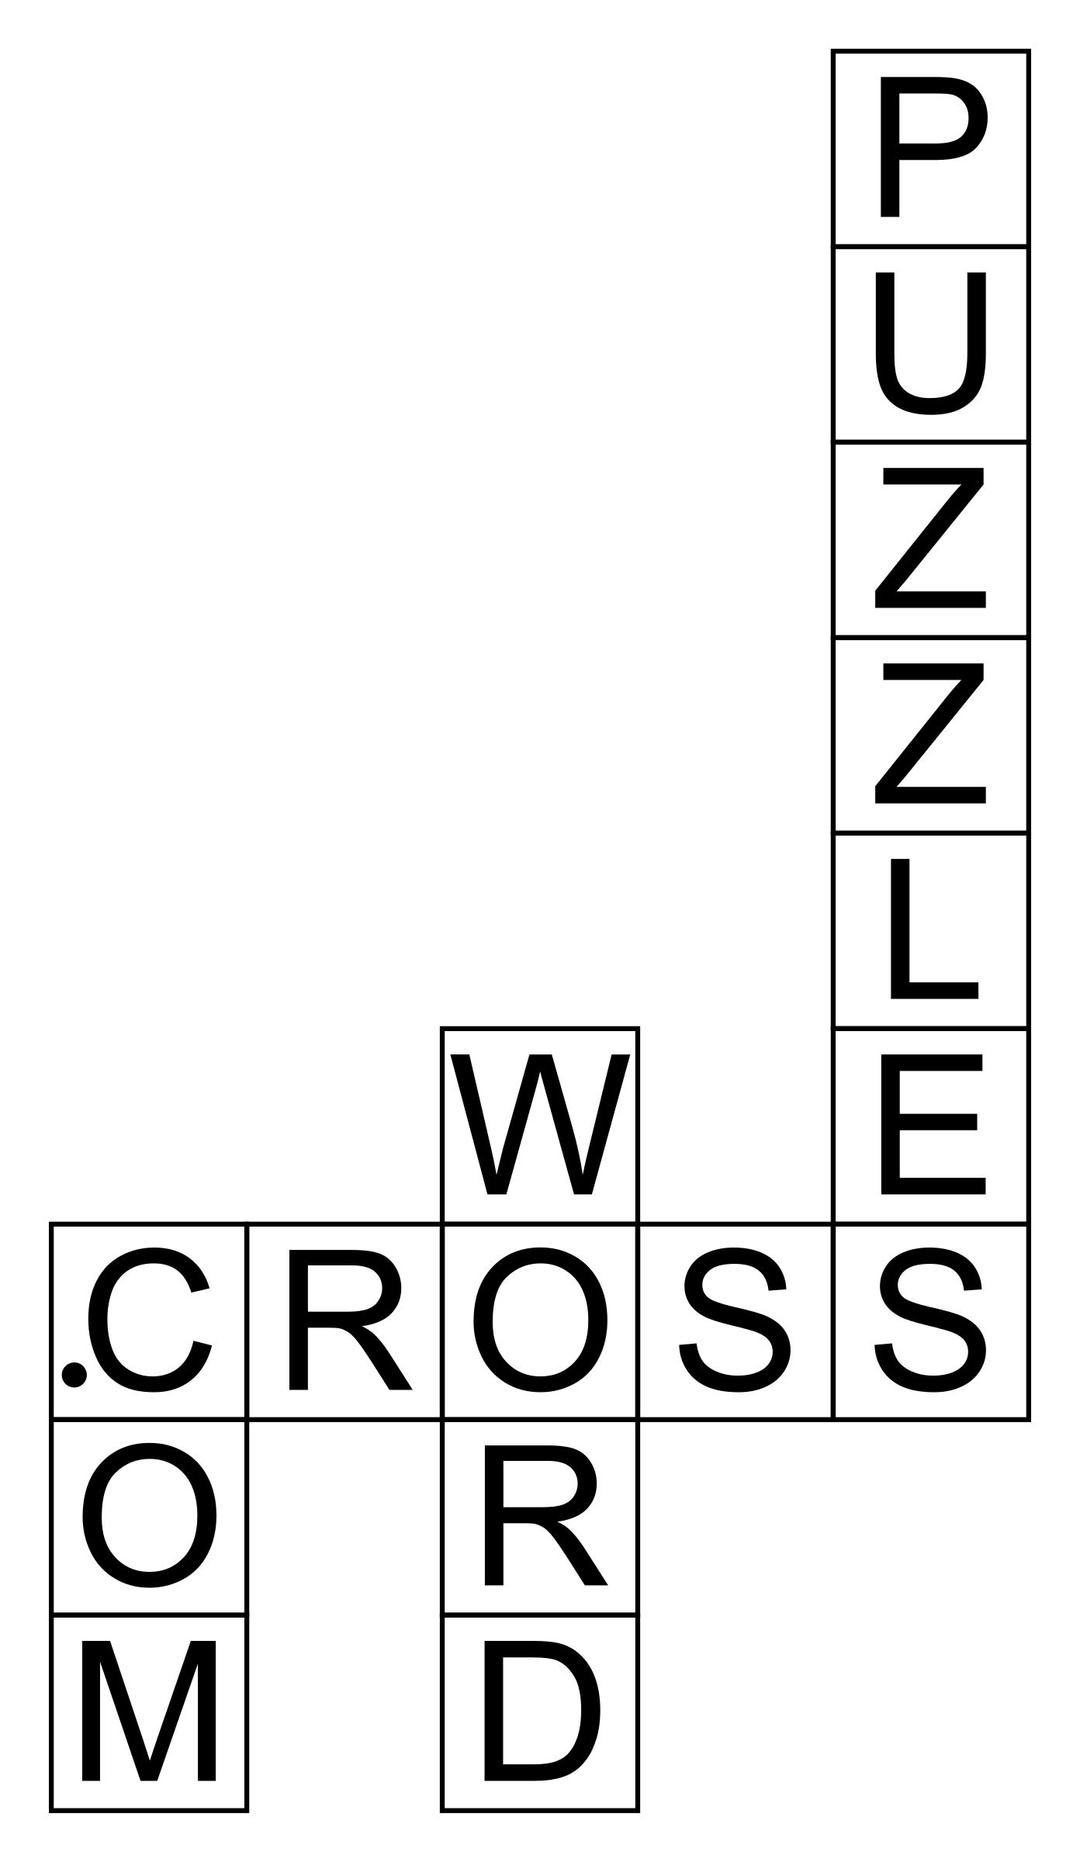 Logo of a typical crossword puzzle website png transparent